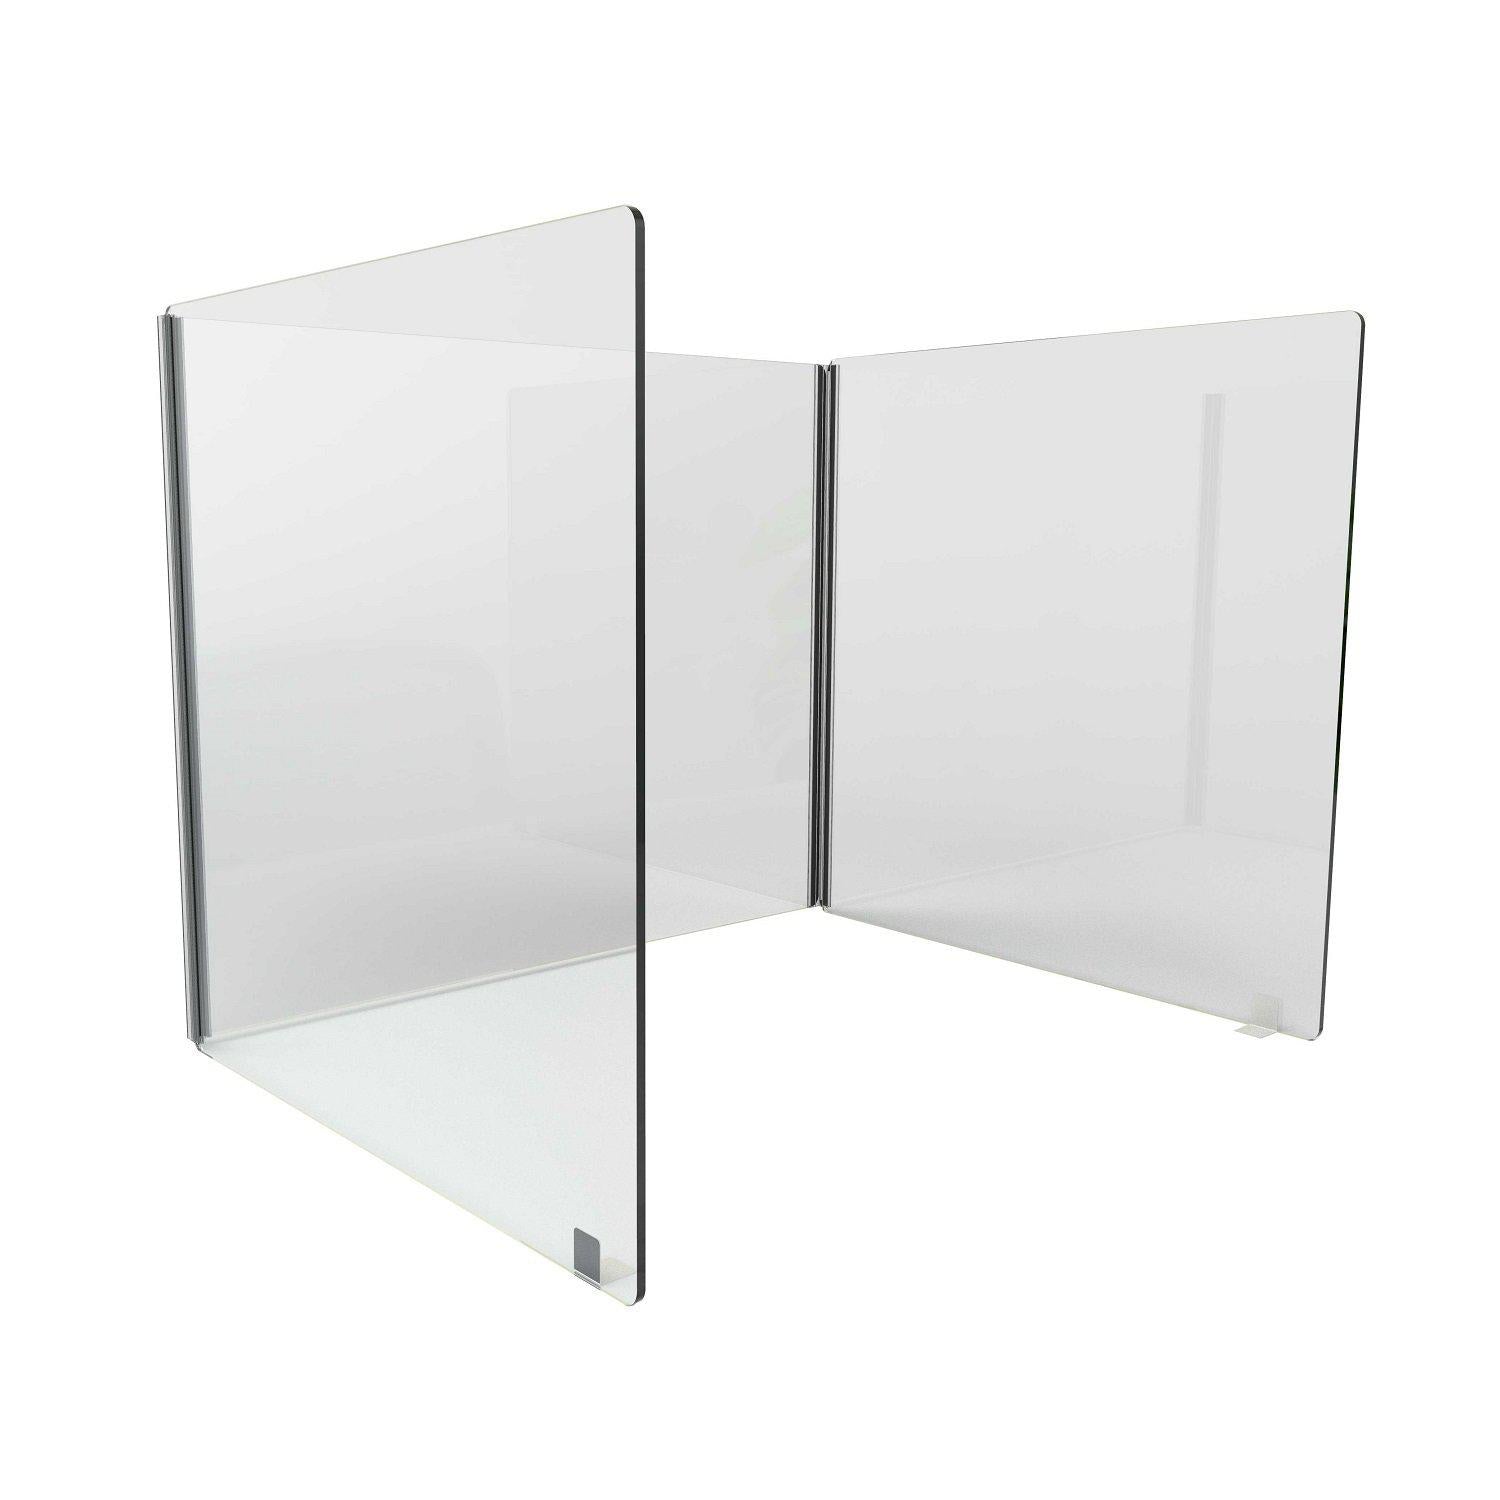 3-Sided Clear Thermoplastic Desktop Protection Screen/Sneeze Guard, 24”H x 48”W x 24”D